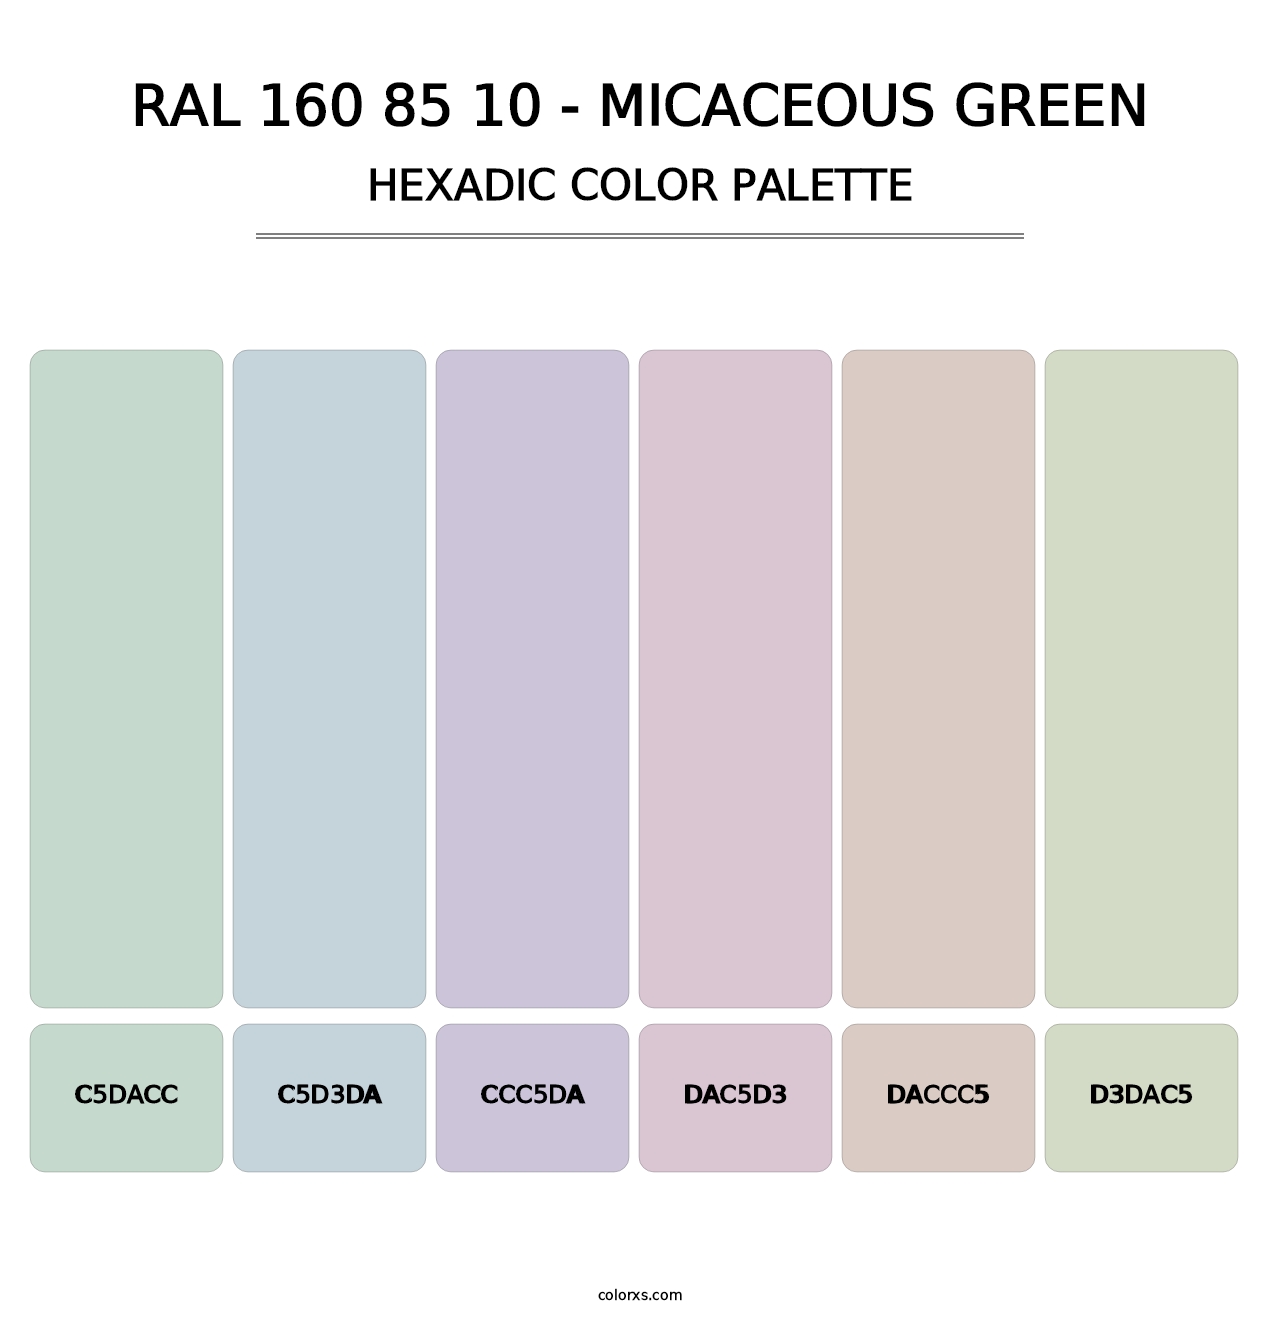 RAL 160 85 10 - Micaceous Green - Hexadic Color Palette